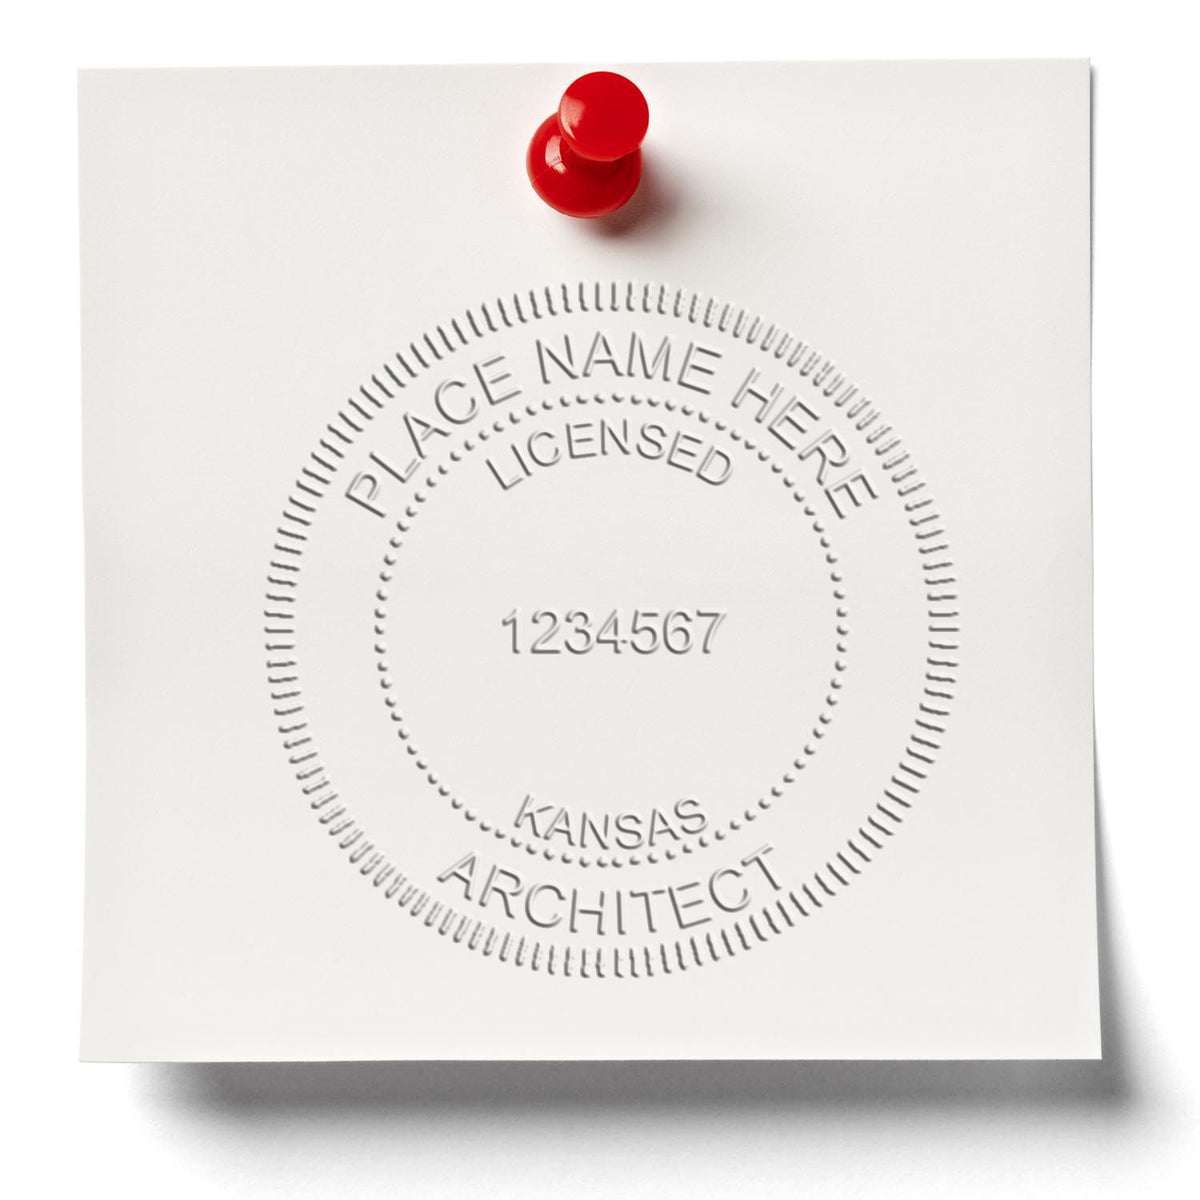 An in use photo of the Hybrid Kansas Architect Seal showing a sample imprint on a cardstock